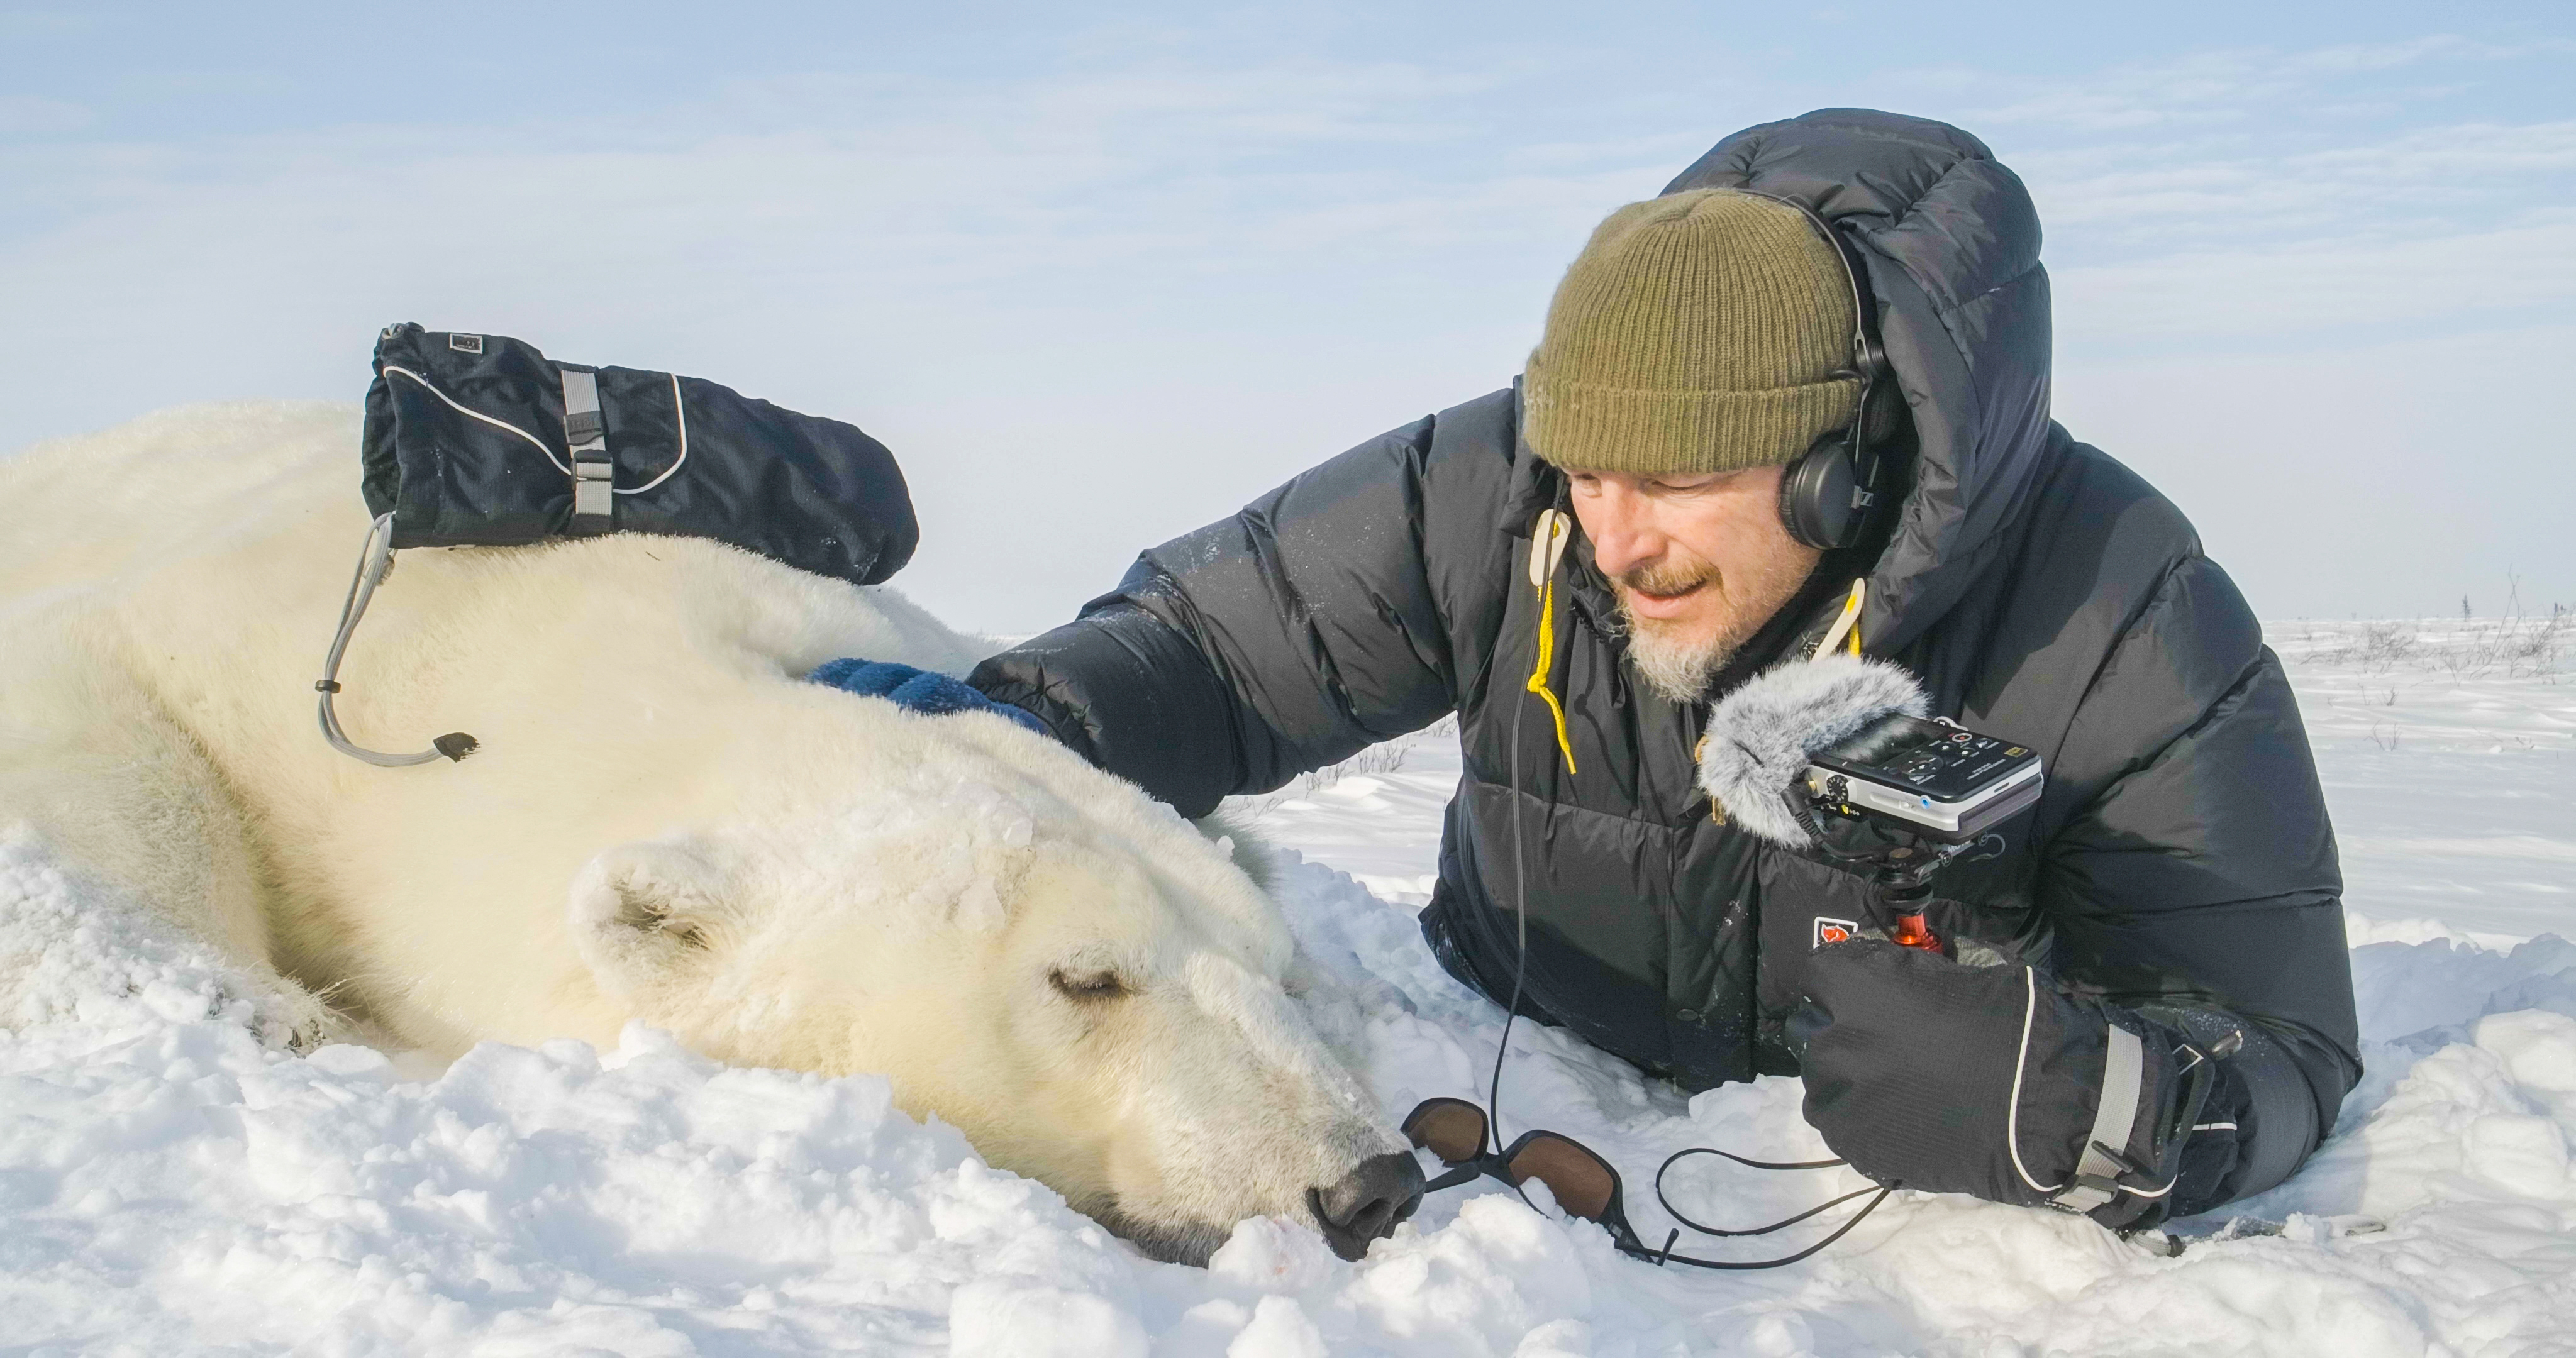 KUOW - The polar bears of Hudson Bay: cubs, climate, and calories